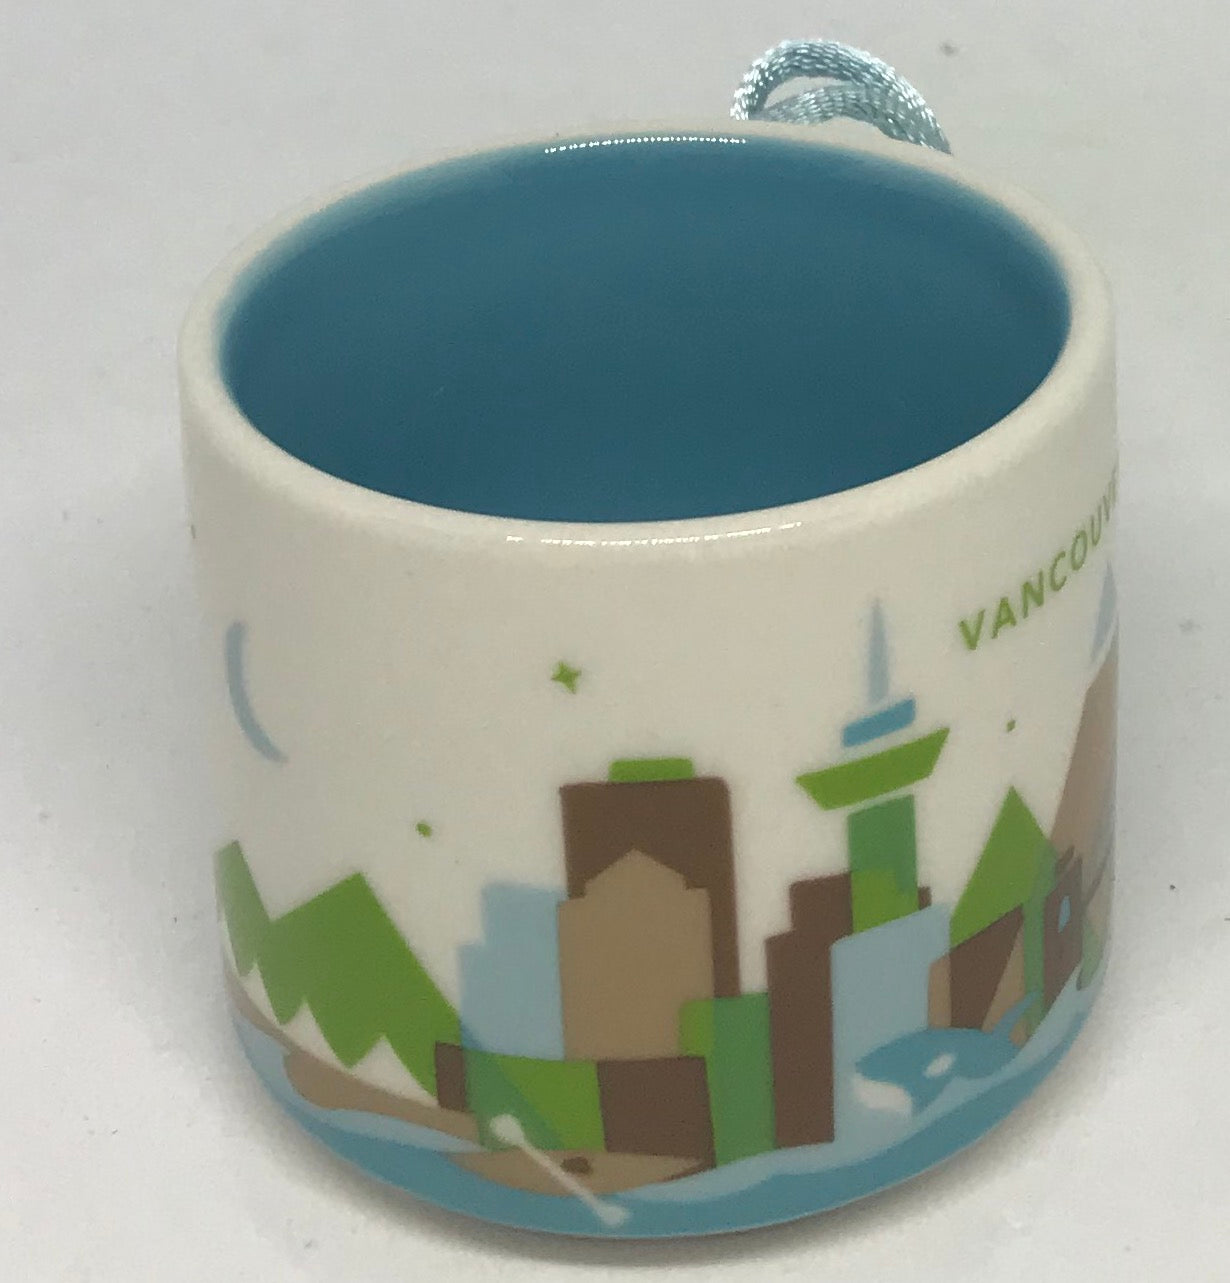 Starbucks Coffee You Are Here Vancouver Canada Ceramic Mug Ornament New with Box